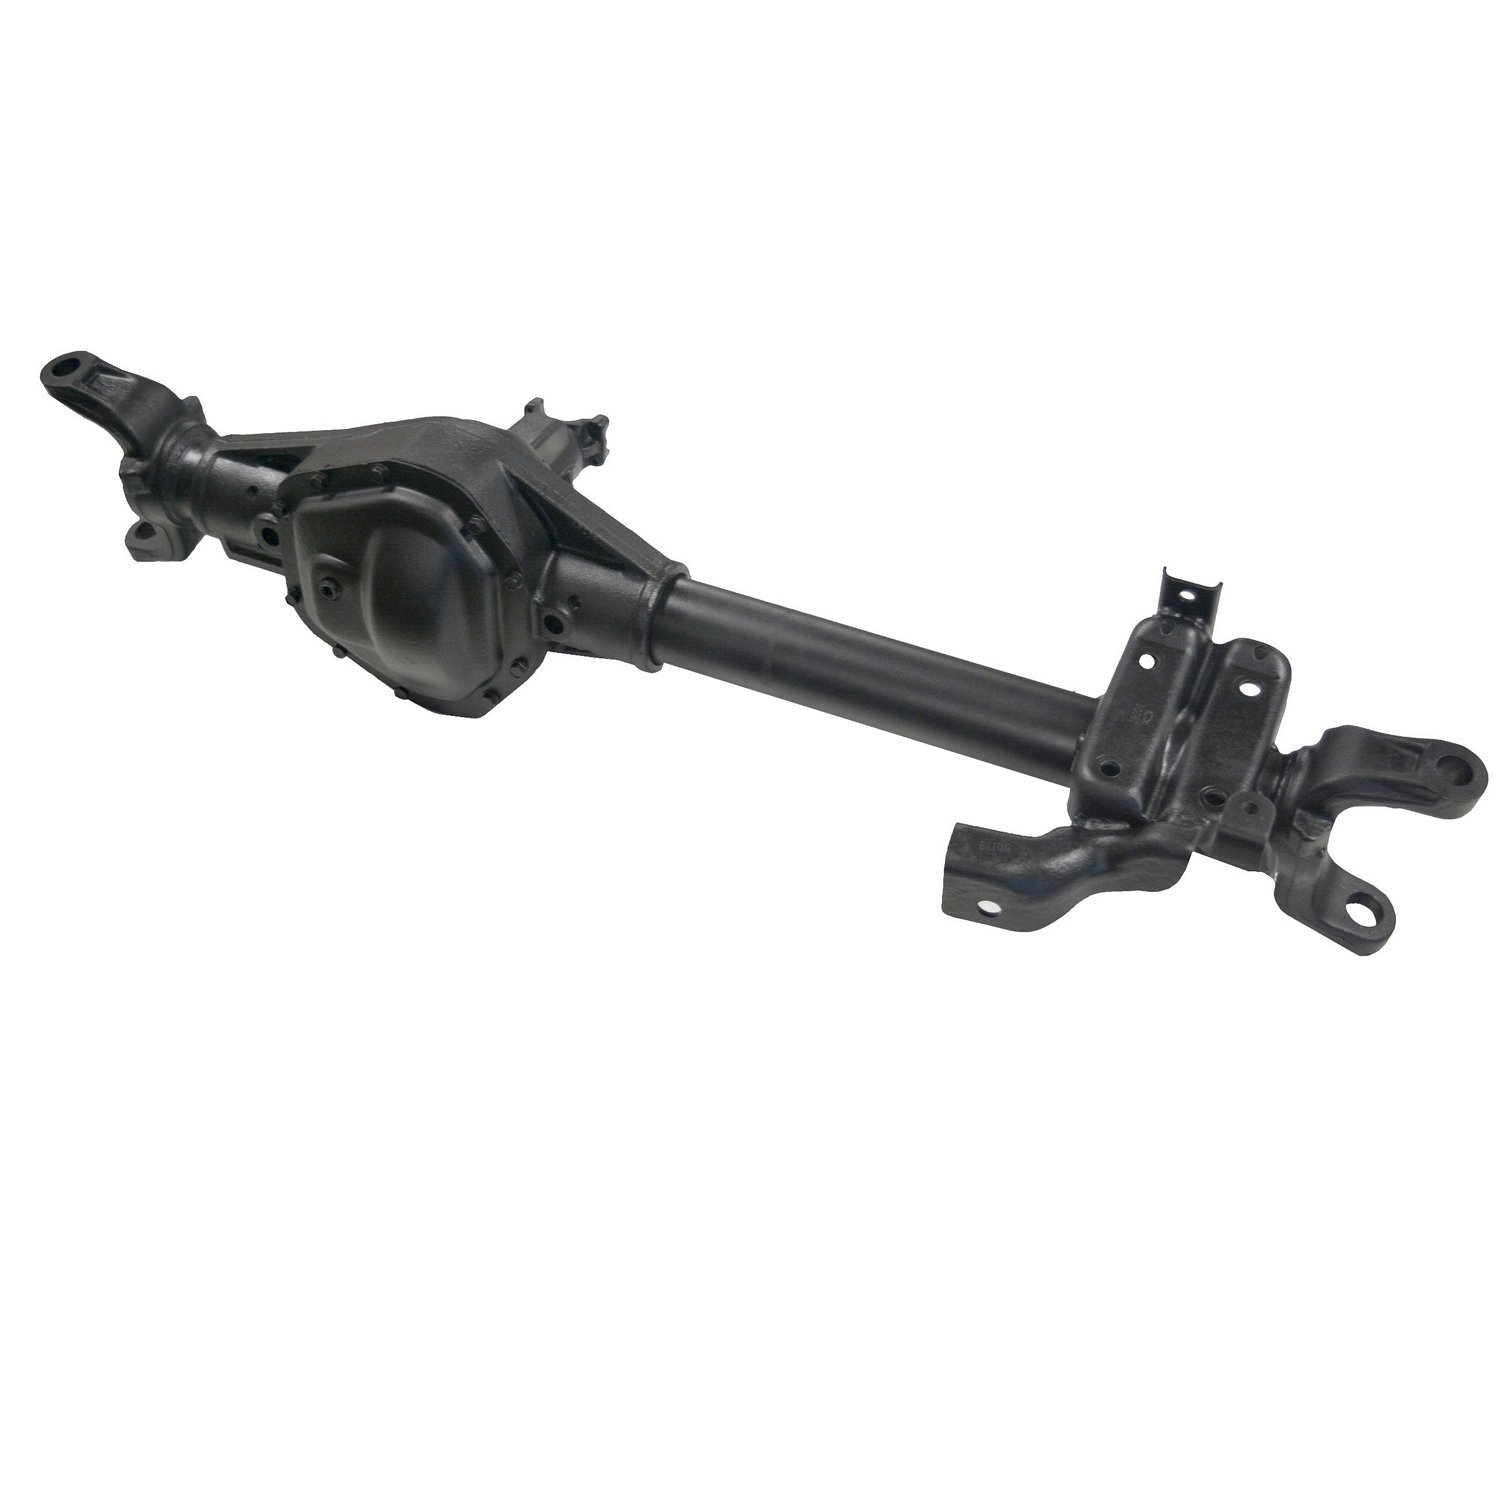 Remanufactured Complete Axle Assy for Dana 50 99-01 F250 & F350 3.73 , SRW, 4 Wheel ABS